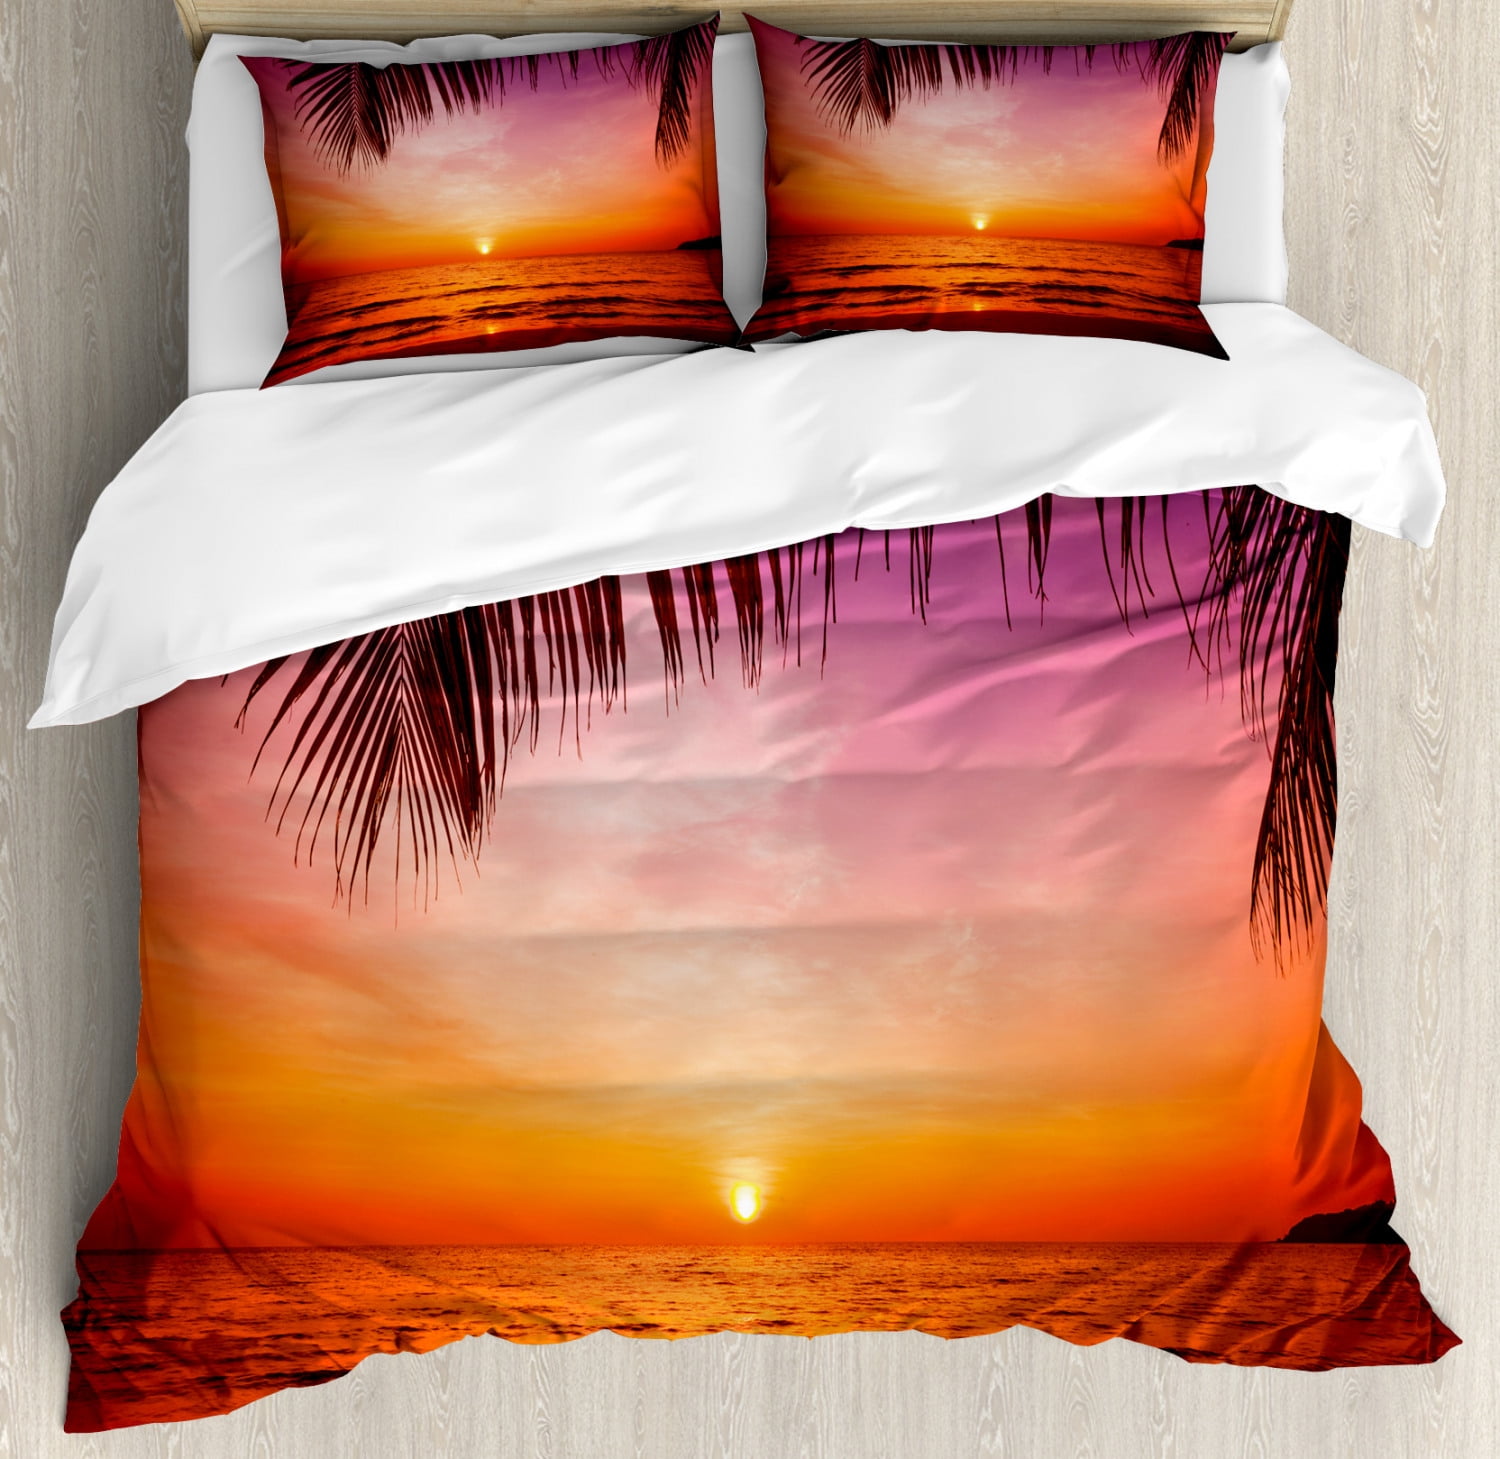 Tropical Duvet Cover Set Exotic Sunset Above The Sea Scenery From